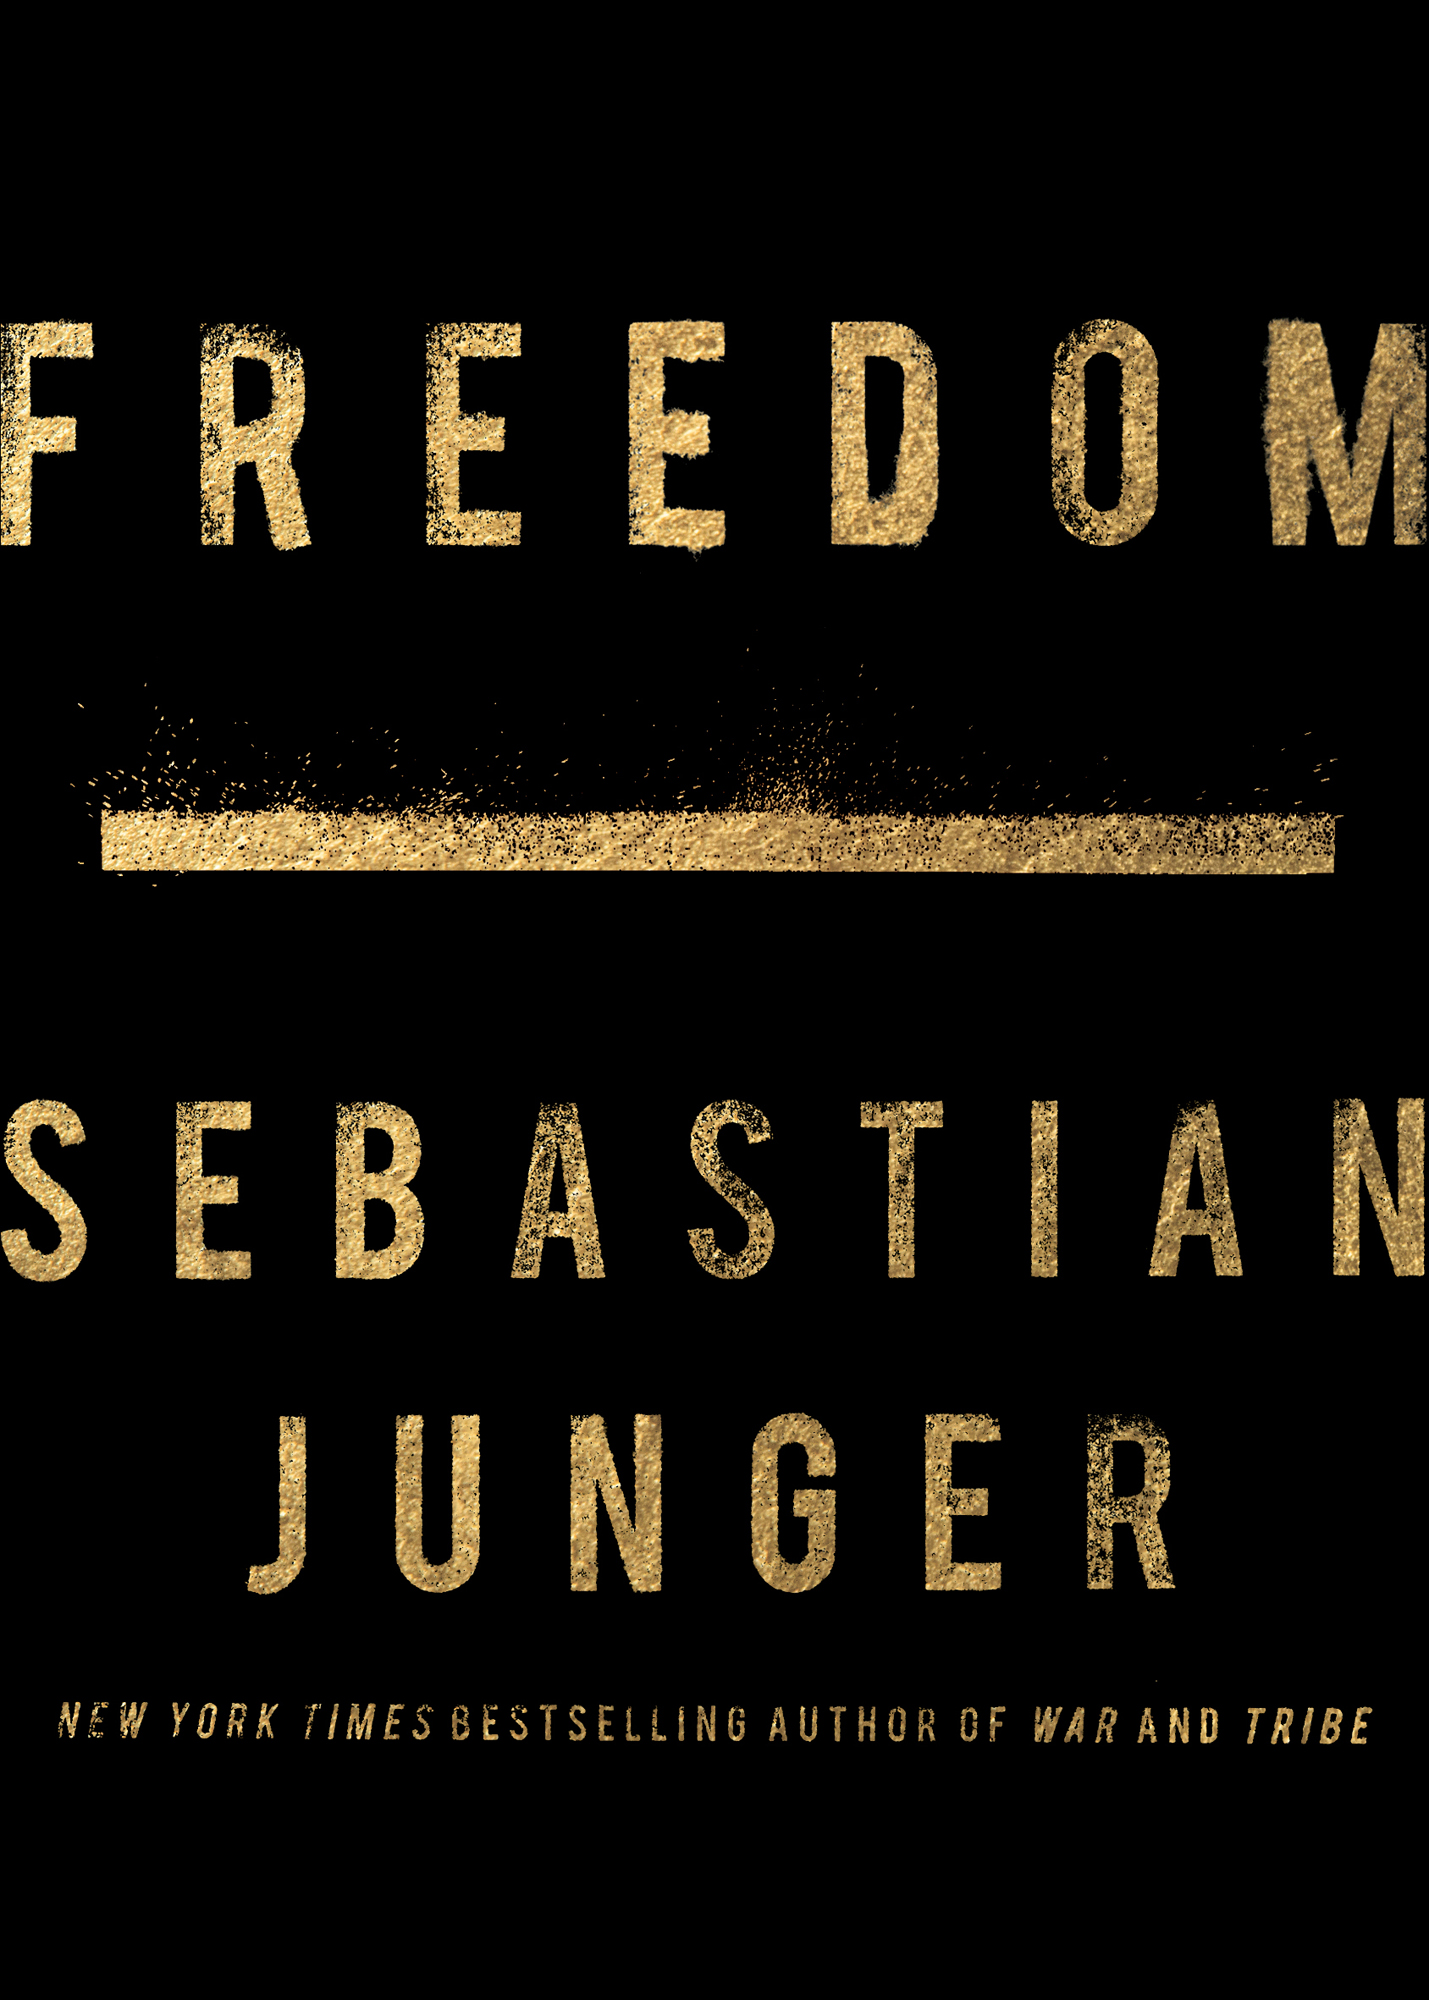 Freedom Sebastian Junger New York Times bestselling author of War and Tribe - photo 1